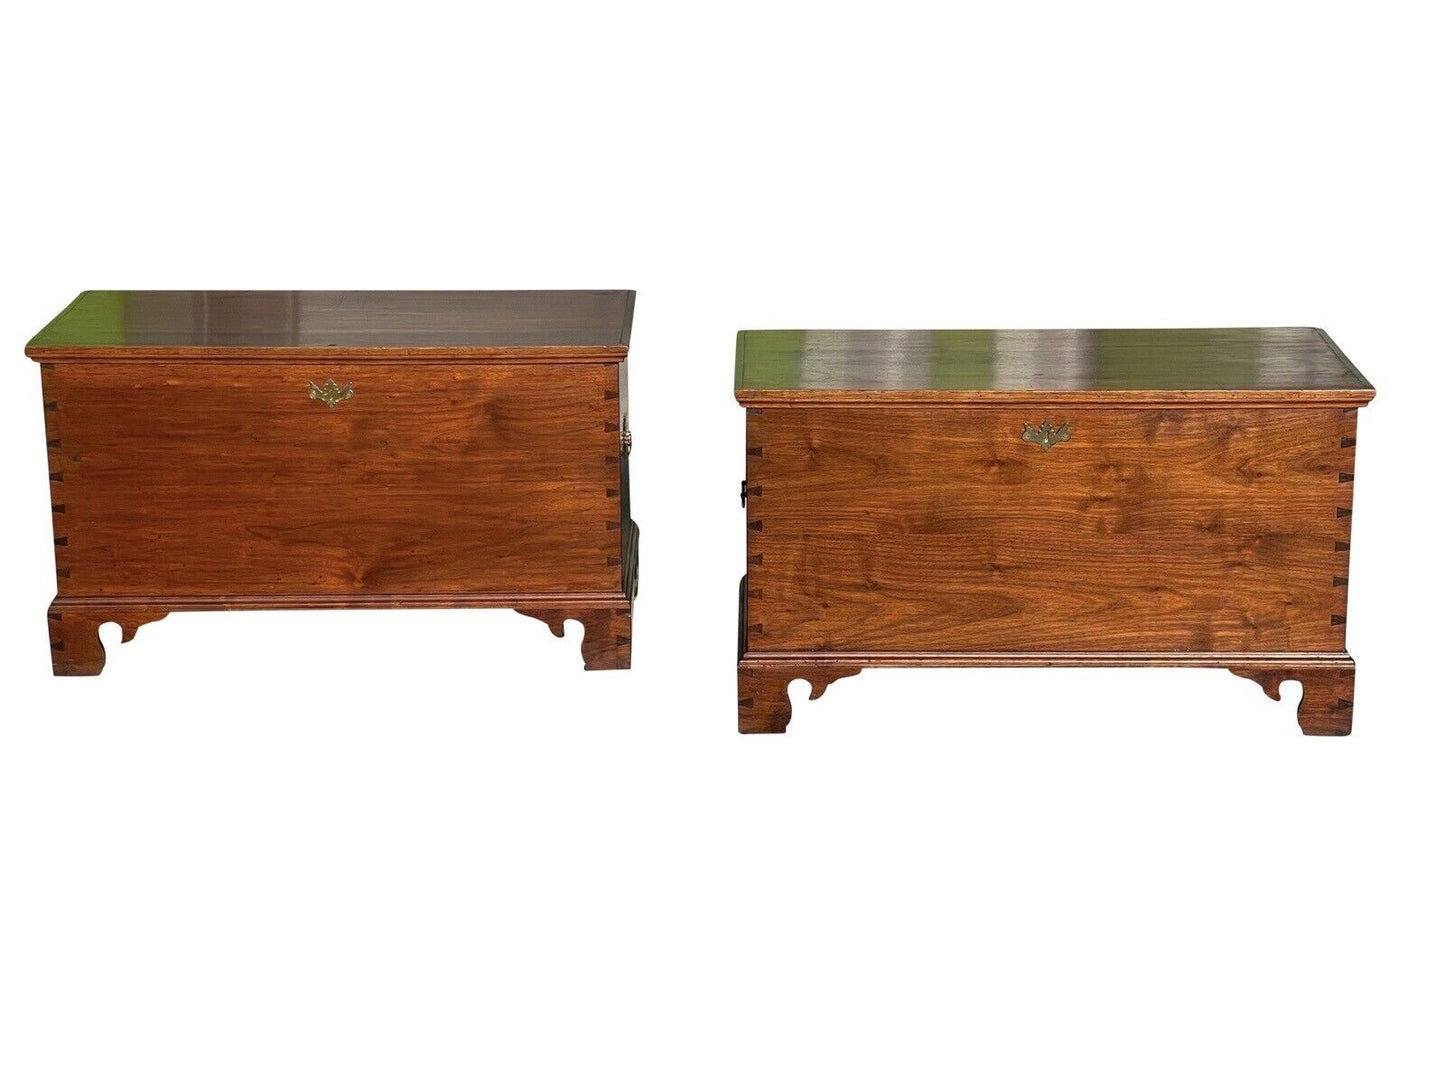 Pair of Queen Anne Style Pennsylvania Walnut Blanket Chests With Secret Interior